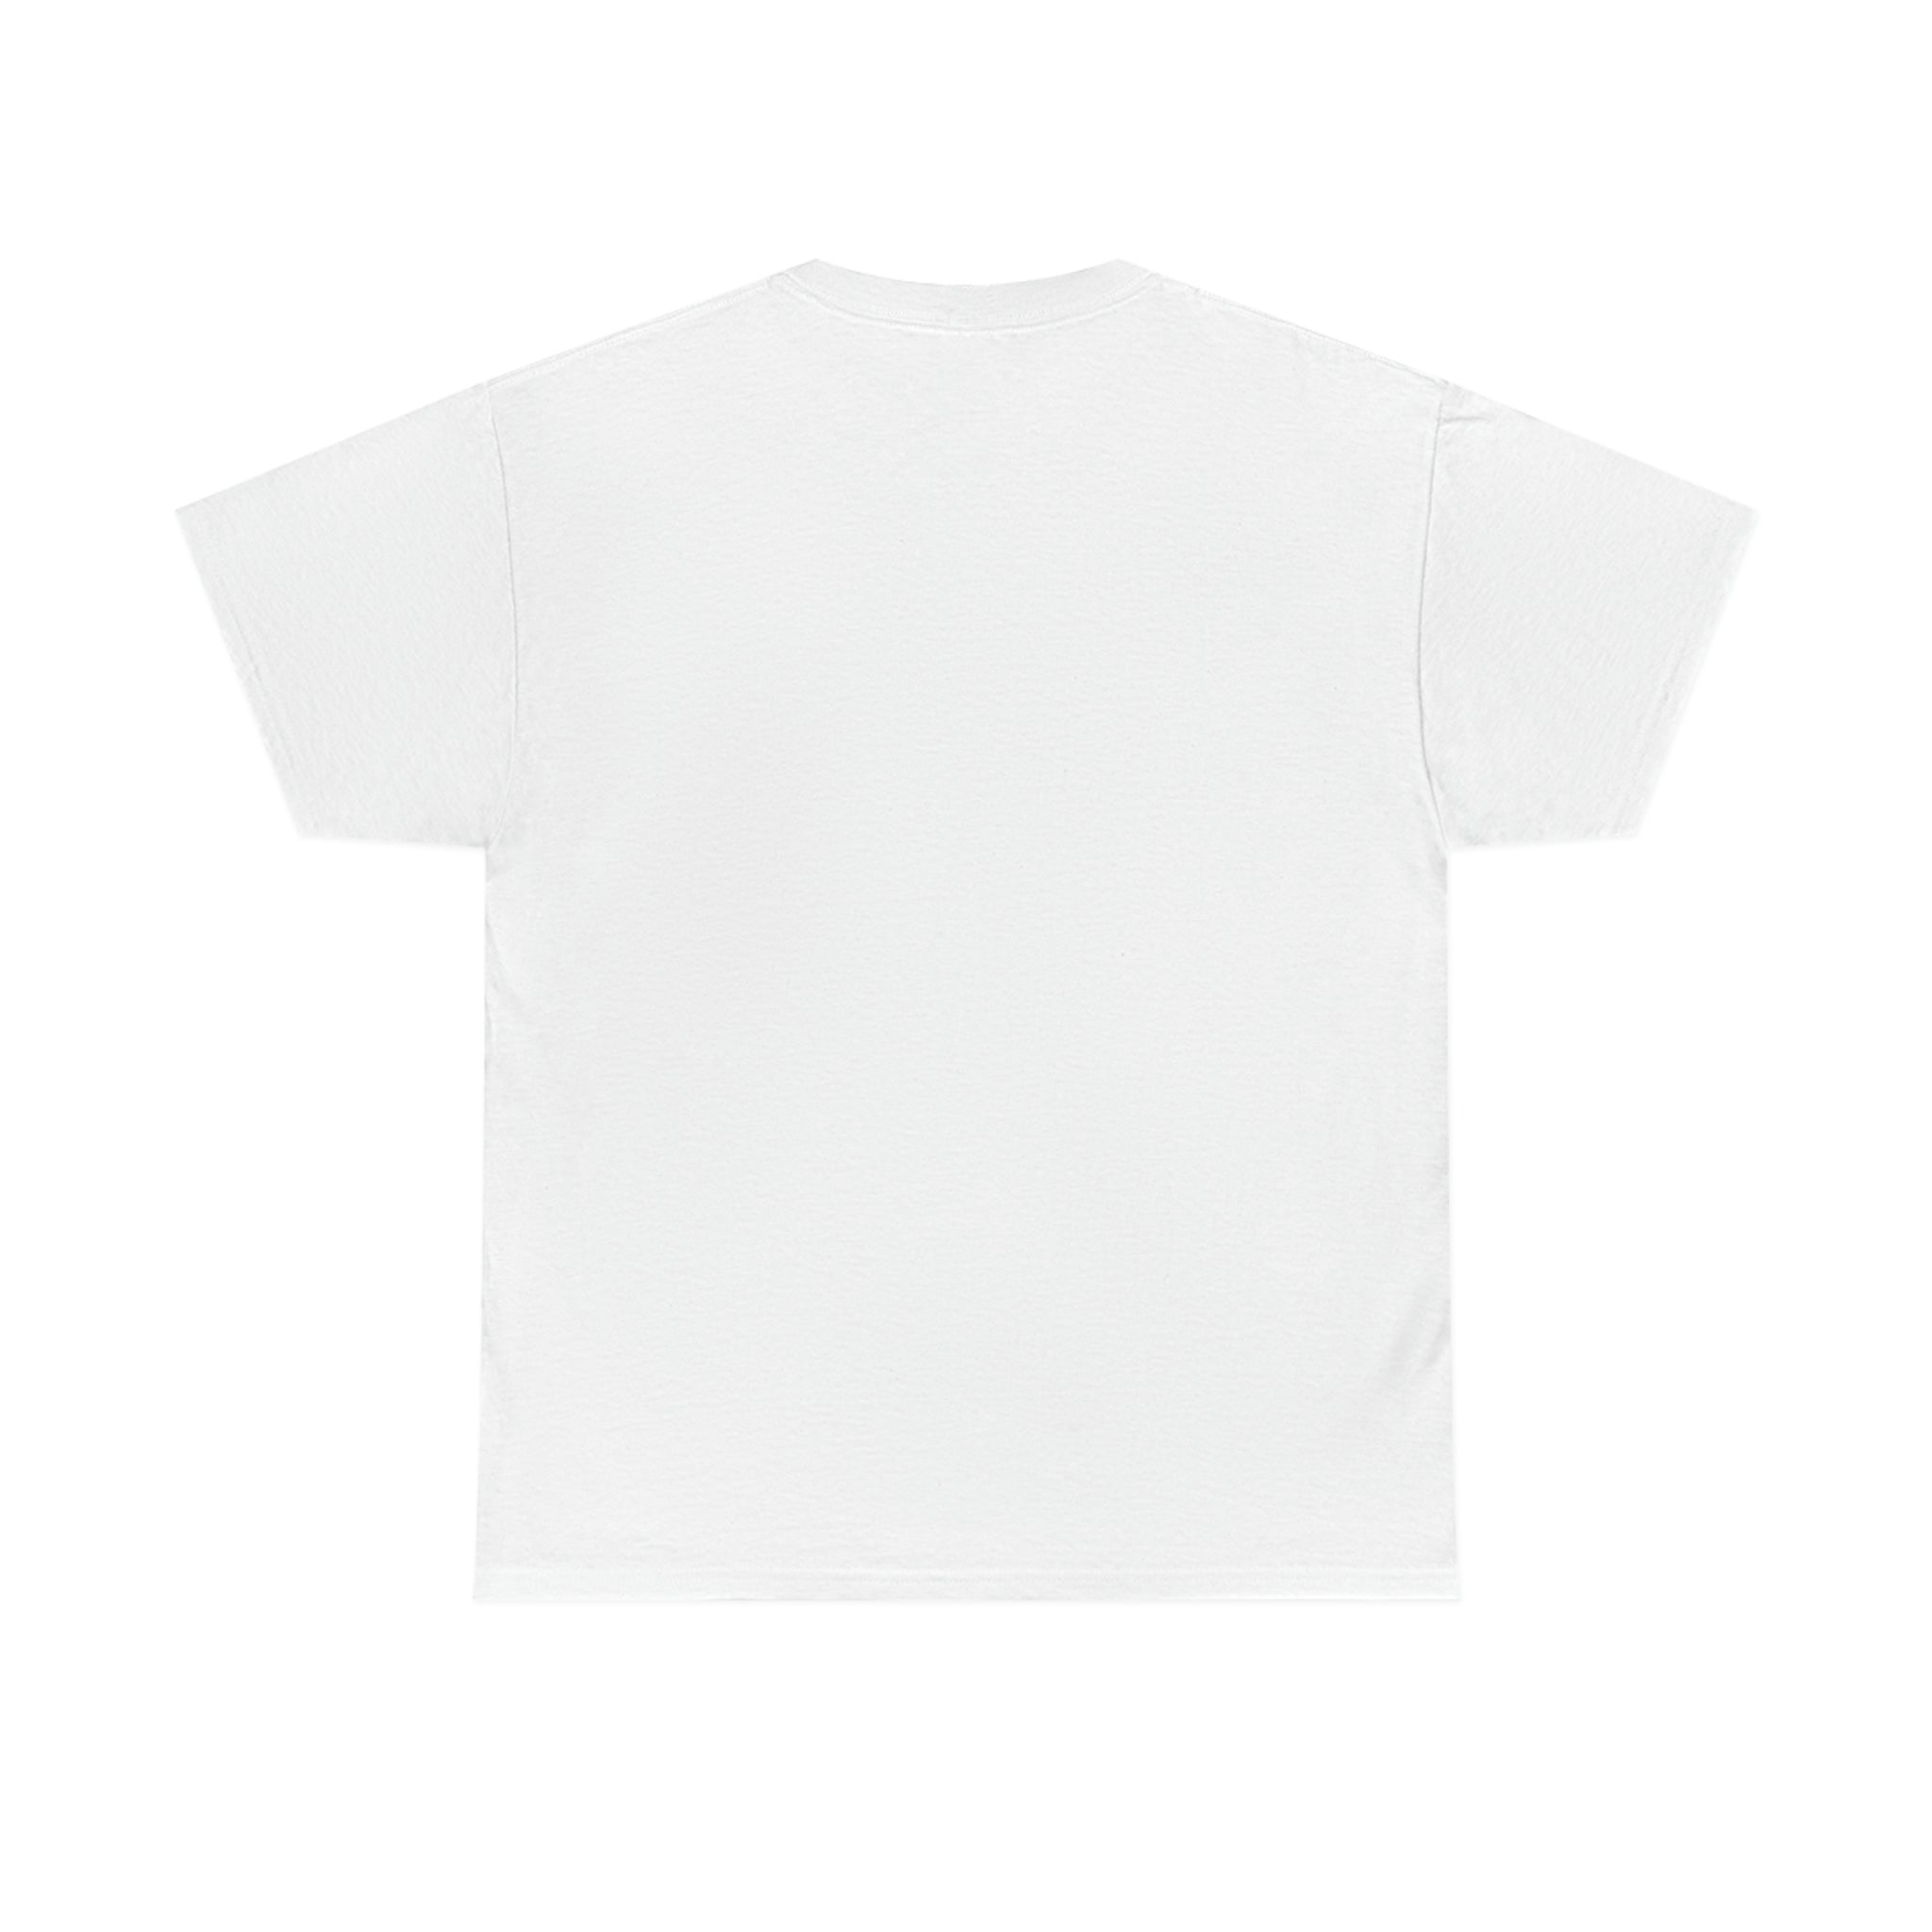 I Passed thanks to ChatGPT - Unisex Heavy Cotton Tee